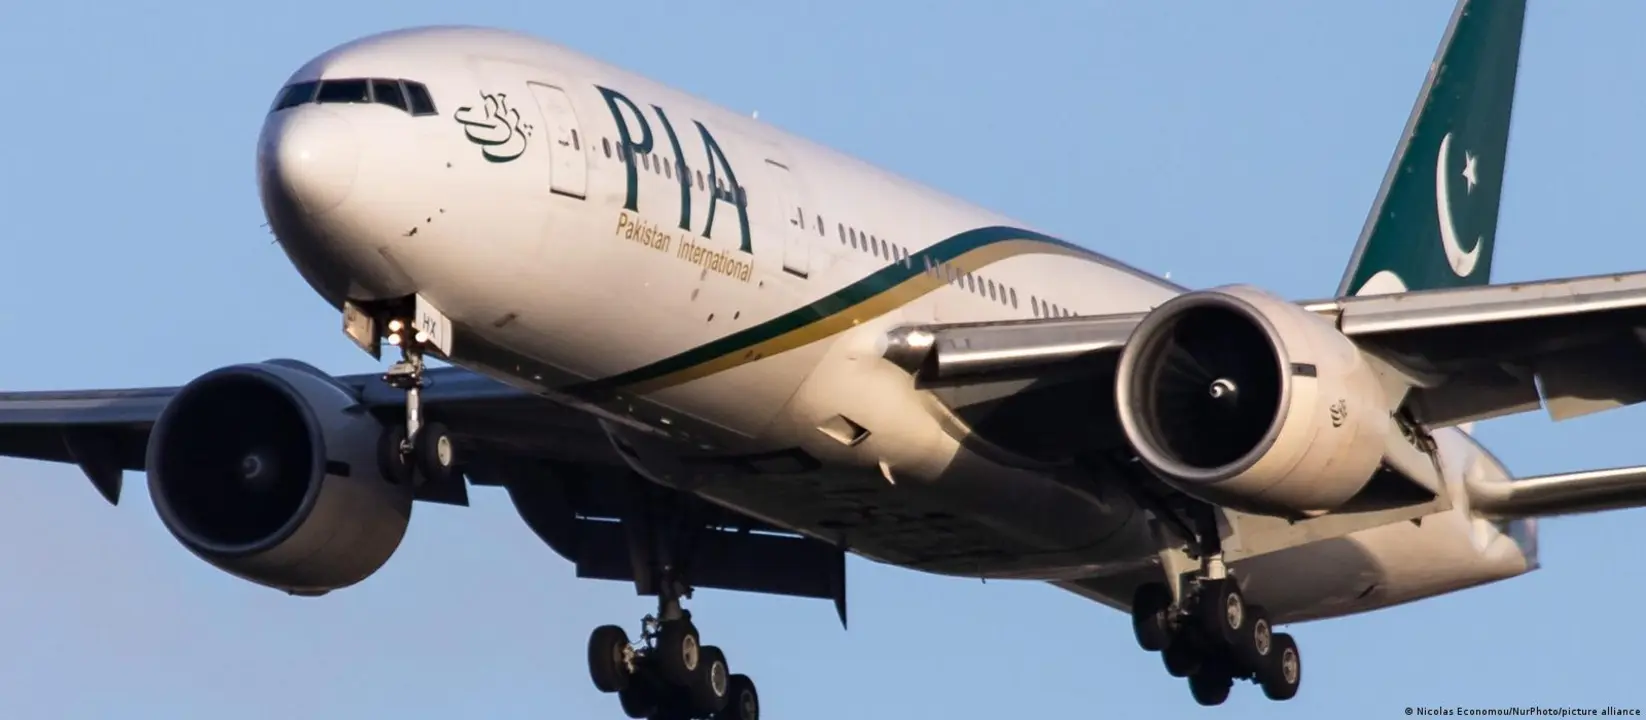 SIFC agreed to divide PIA